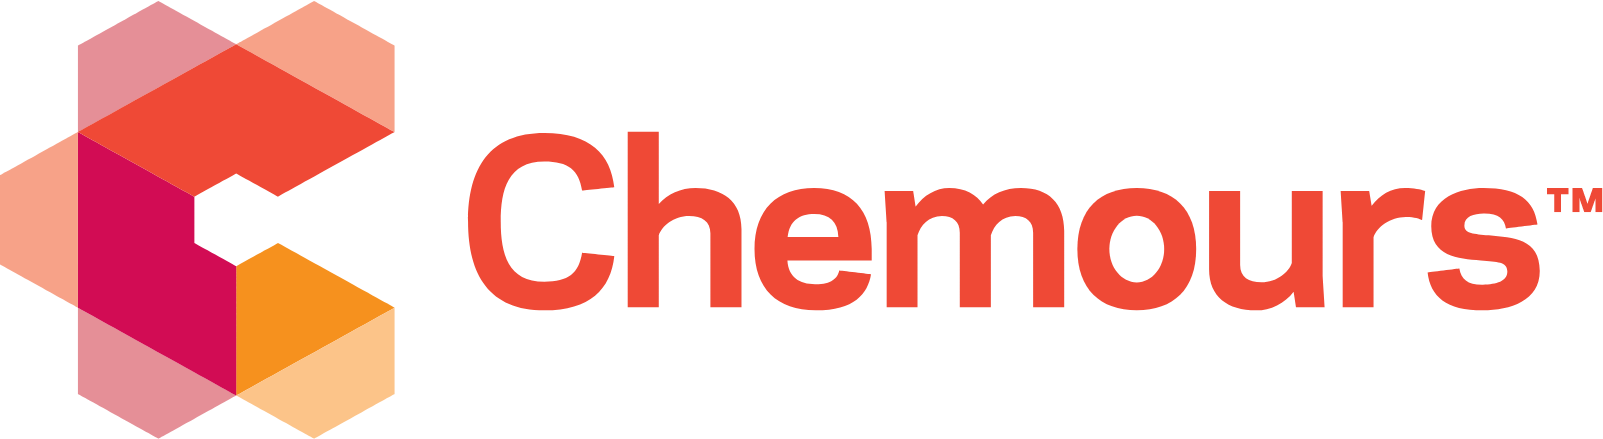 Chemours
 logo large (transparent PNG)